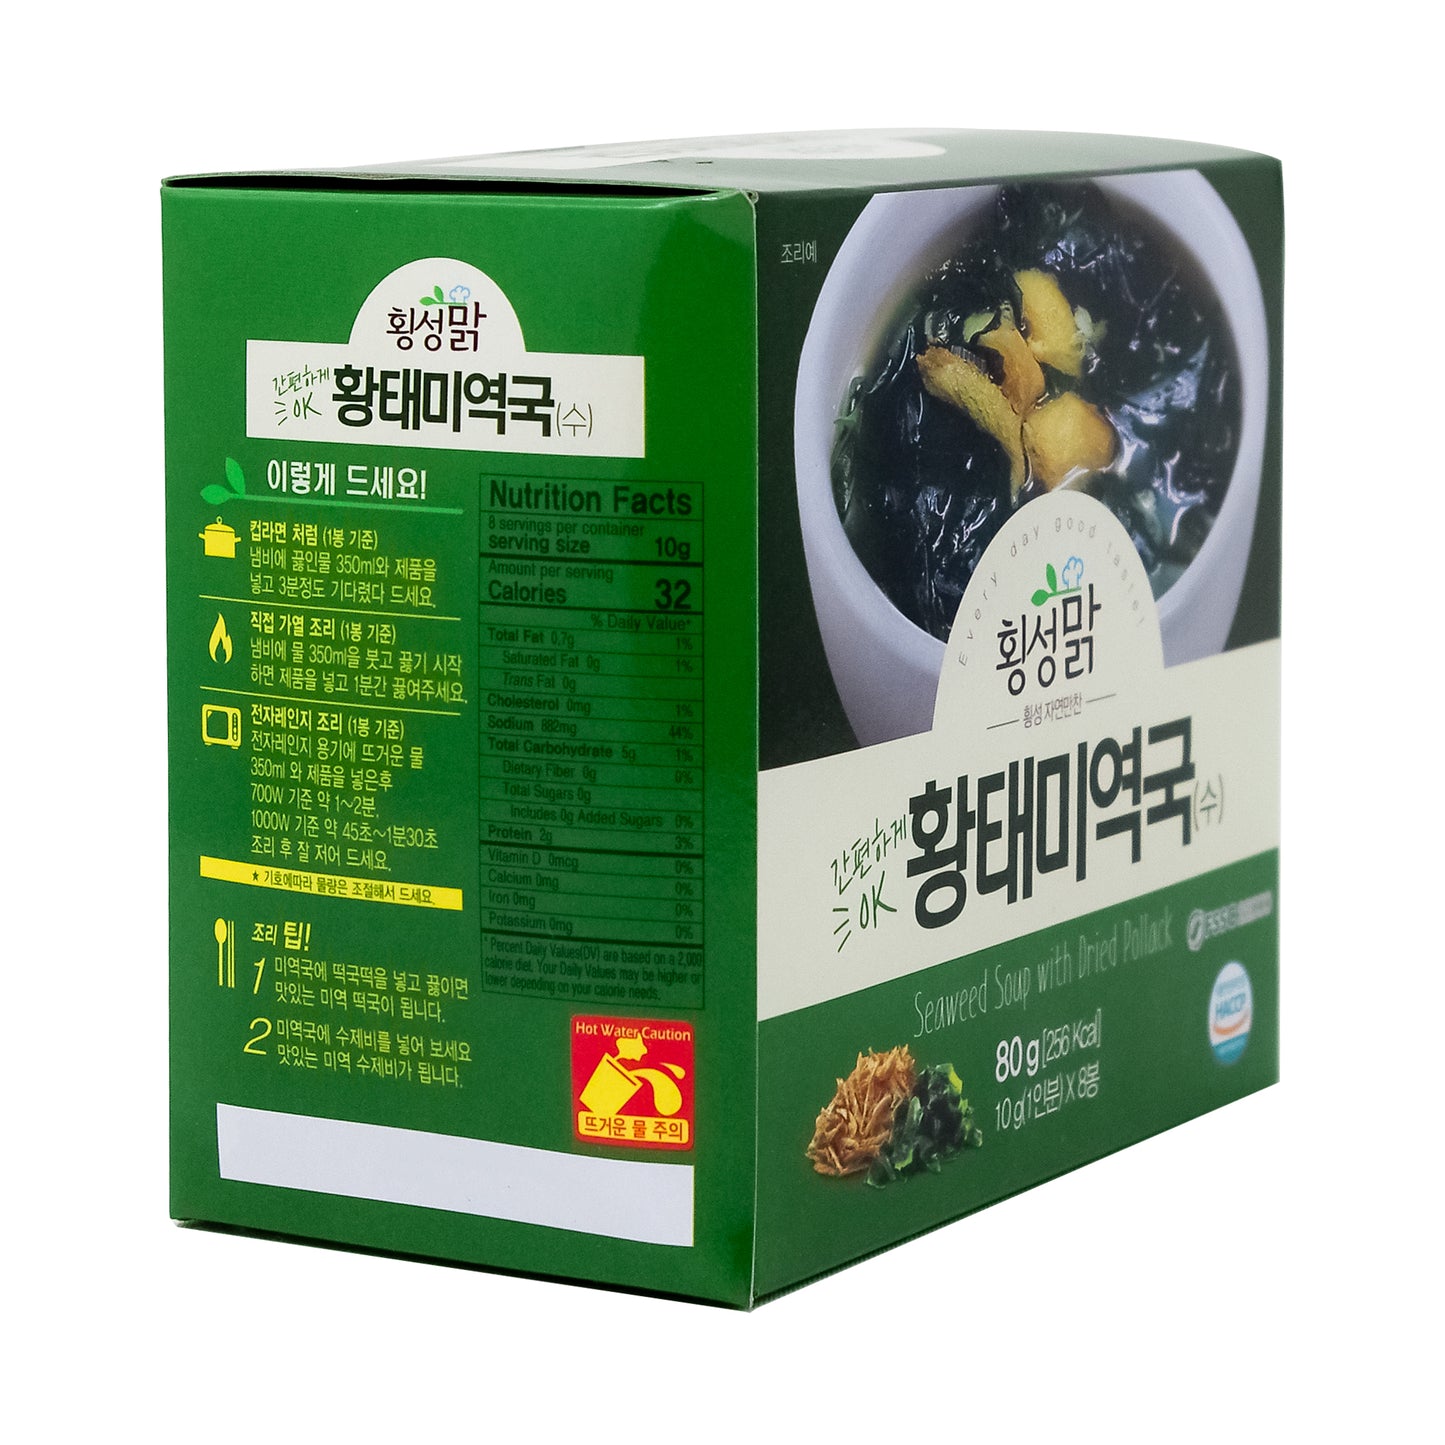 Korean Kfood Low Calorie Healthy Diet Food Dried seaweed Soup 80g ( 10g x 8 Pack ) – with Dried Pollack 황태미역국